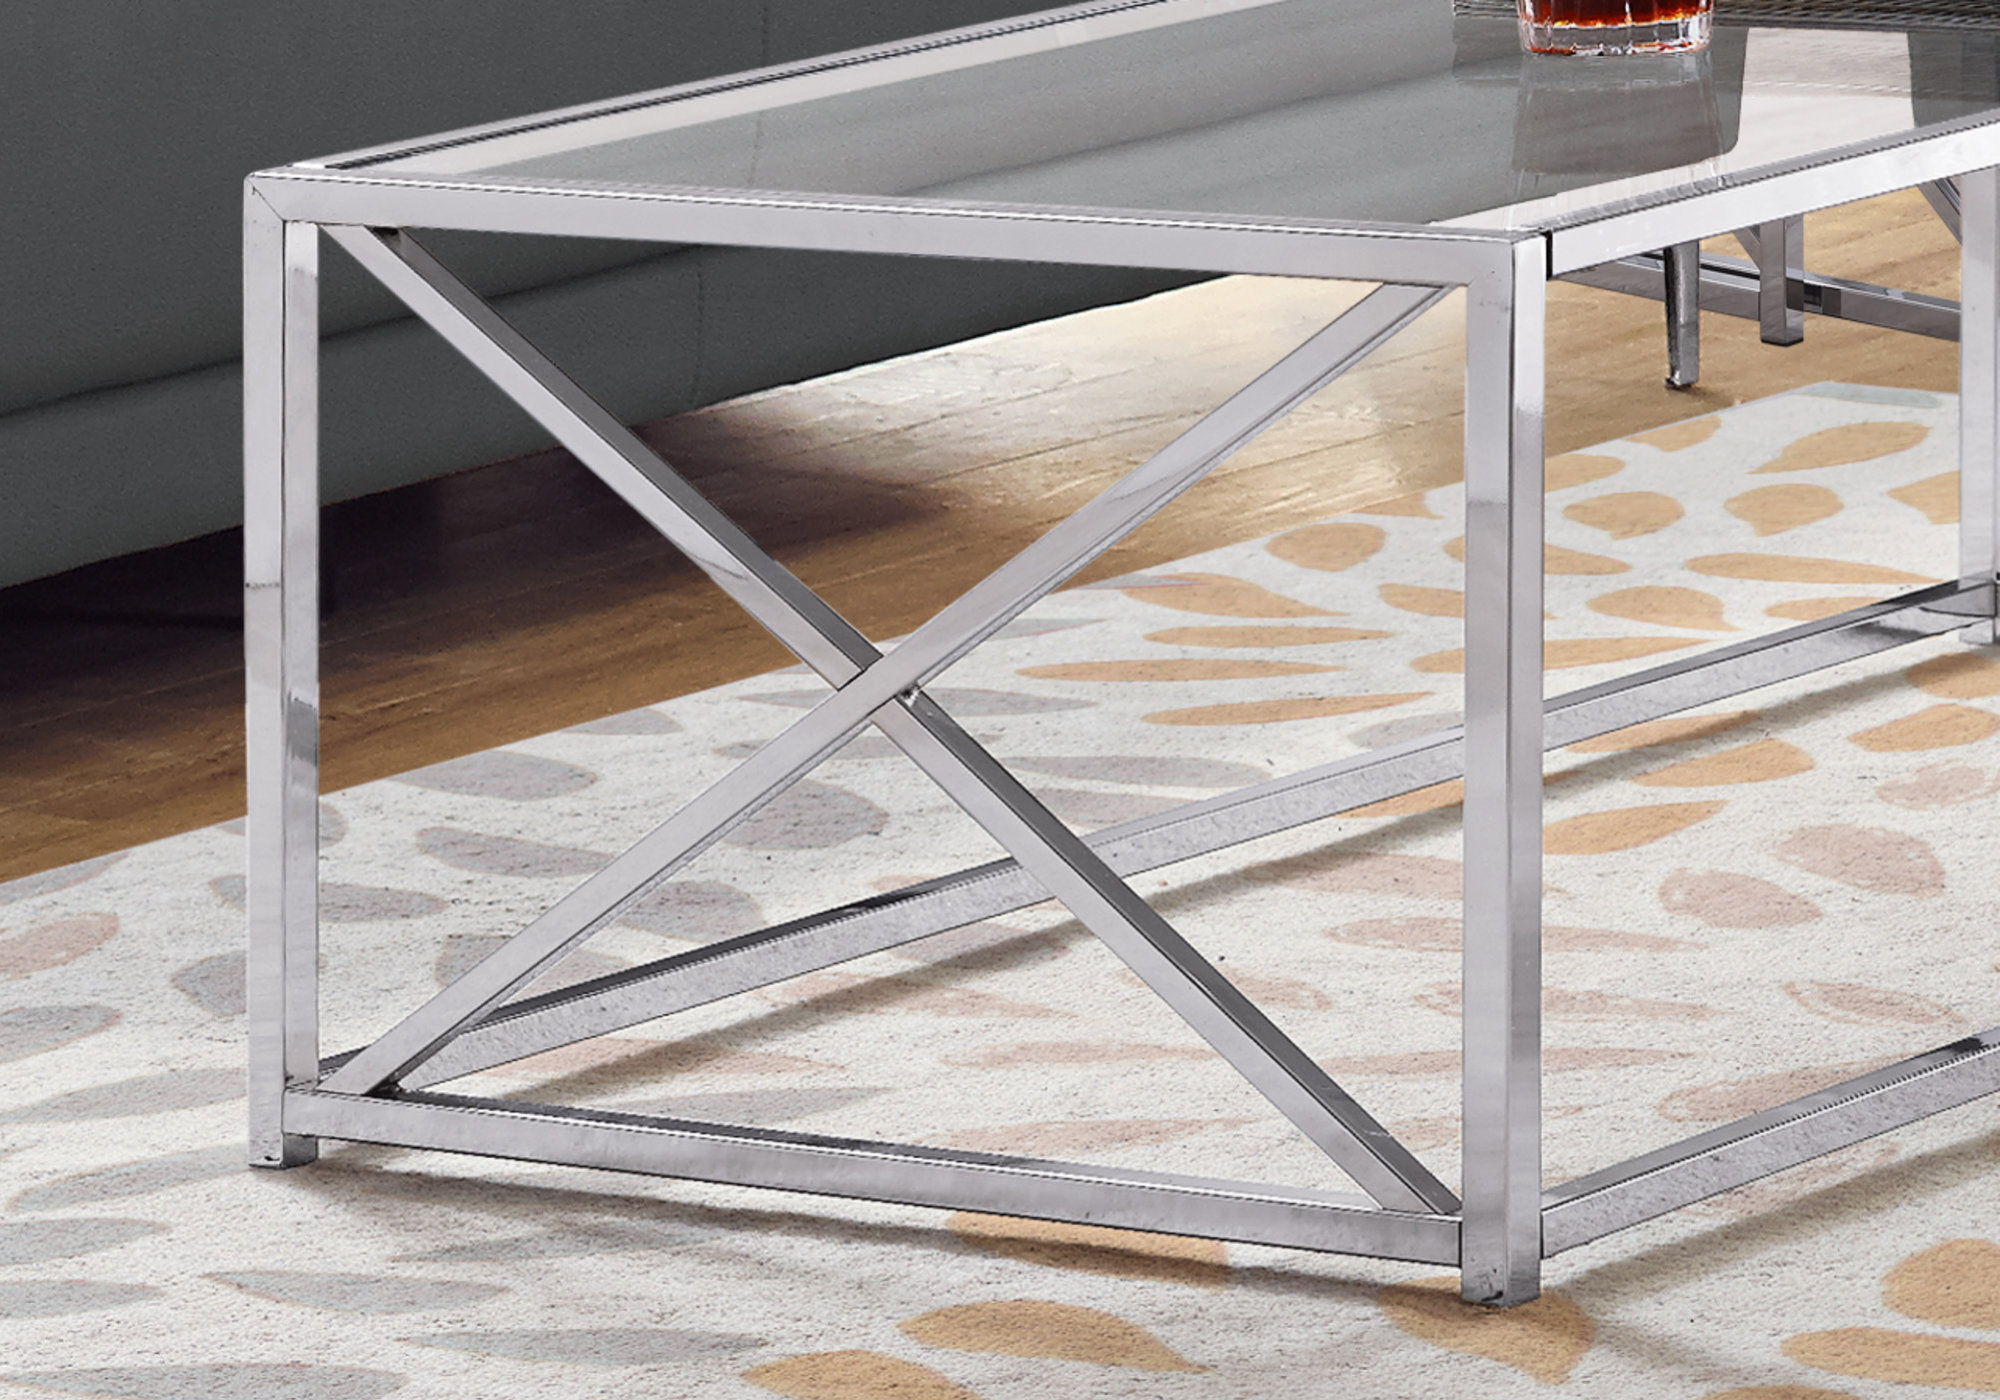 COFFEE TABLE - 44"L / CHROME METAL WITH TEMPERED GLASS